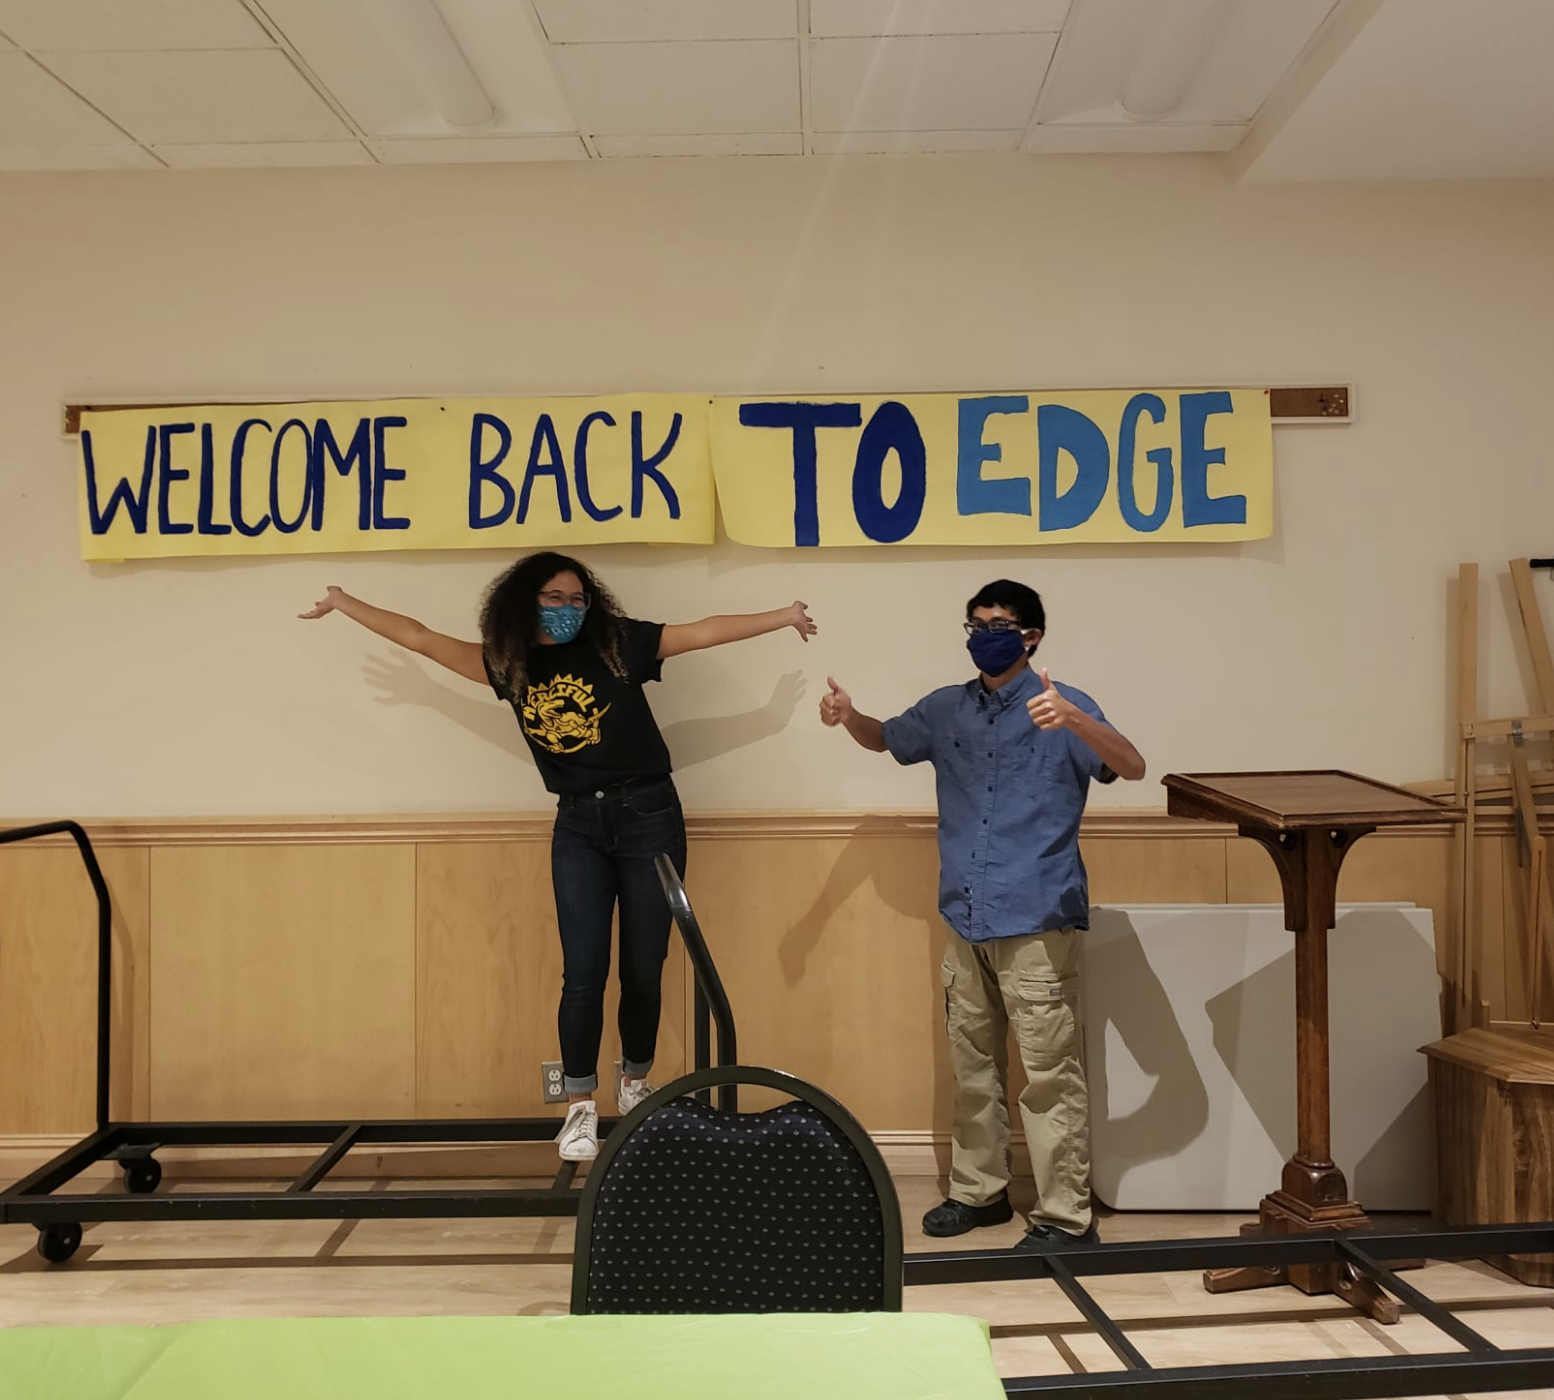 Two teens in front of a "Welcome back to EDGE" sign